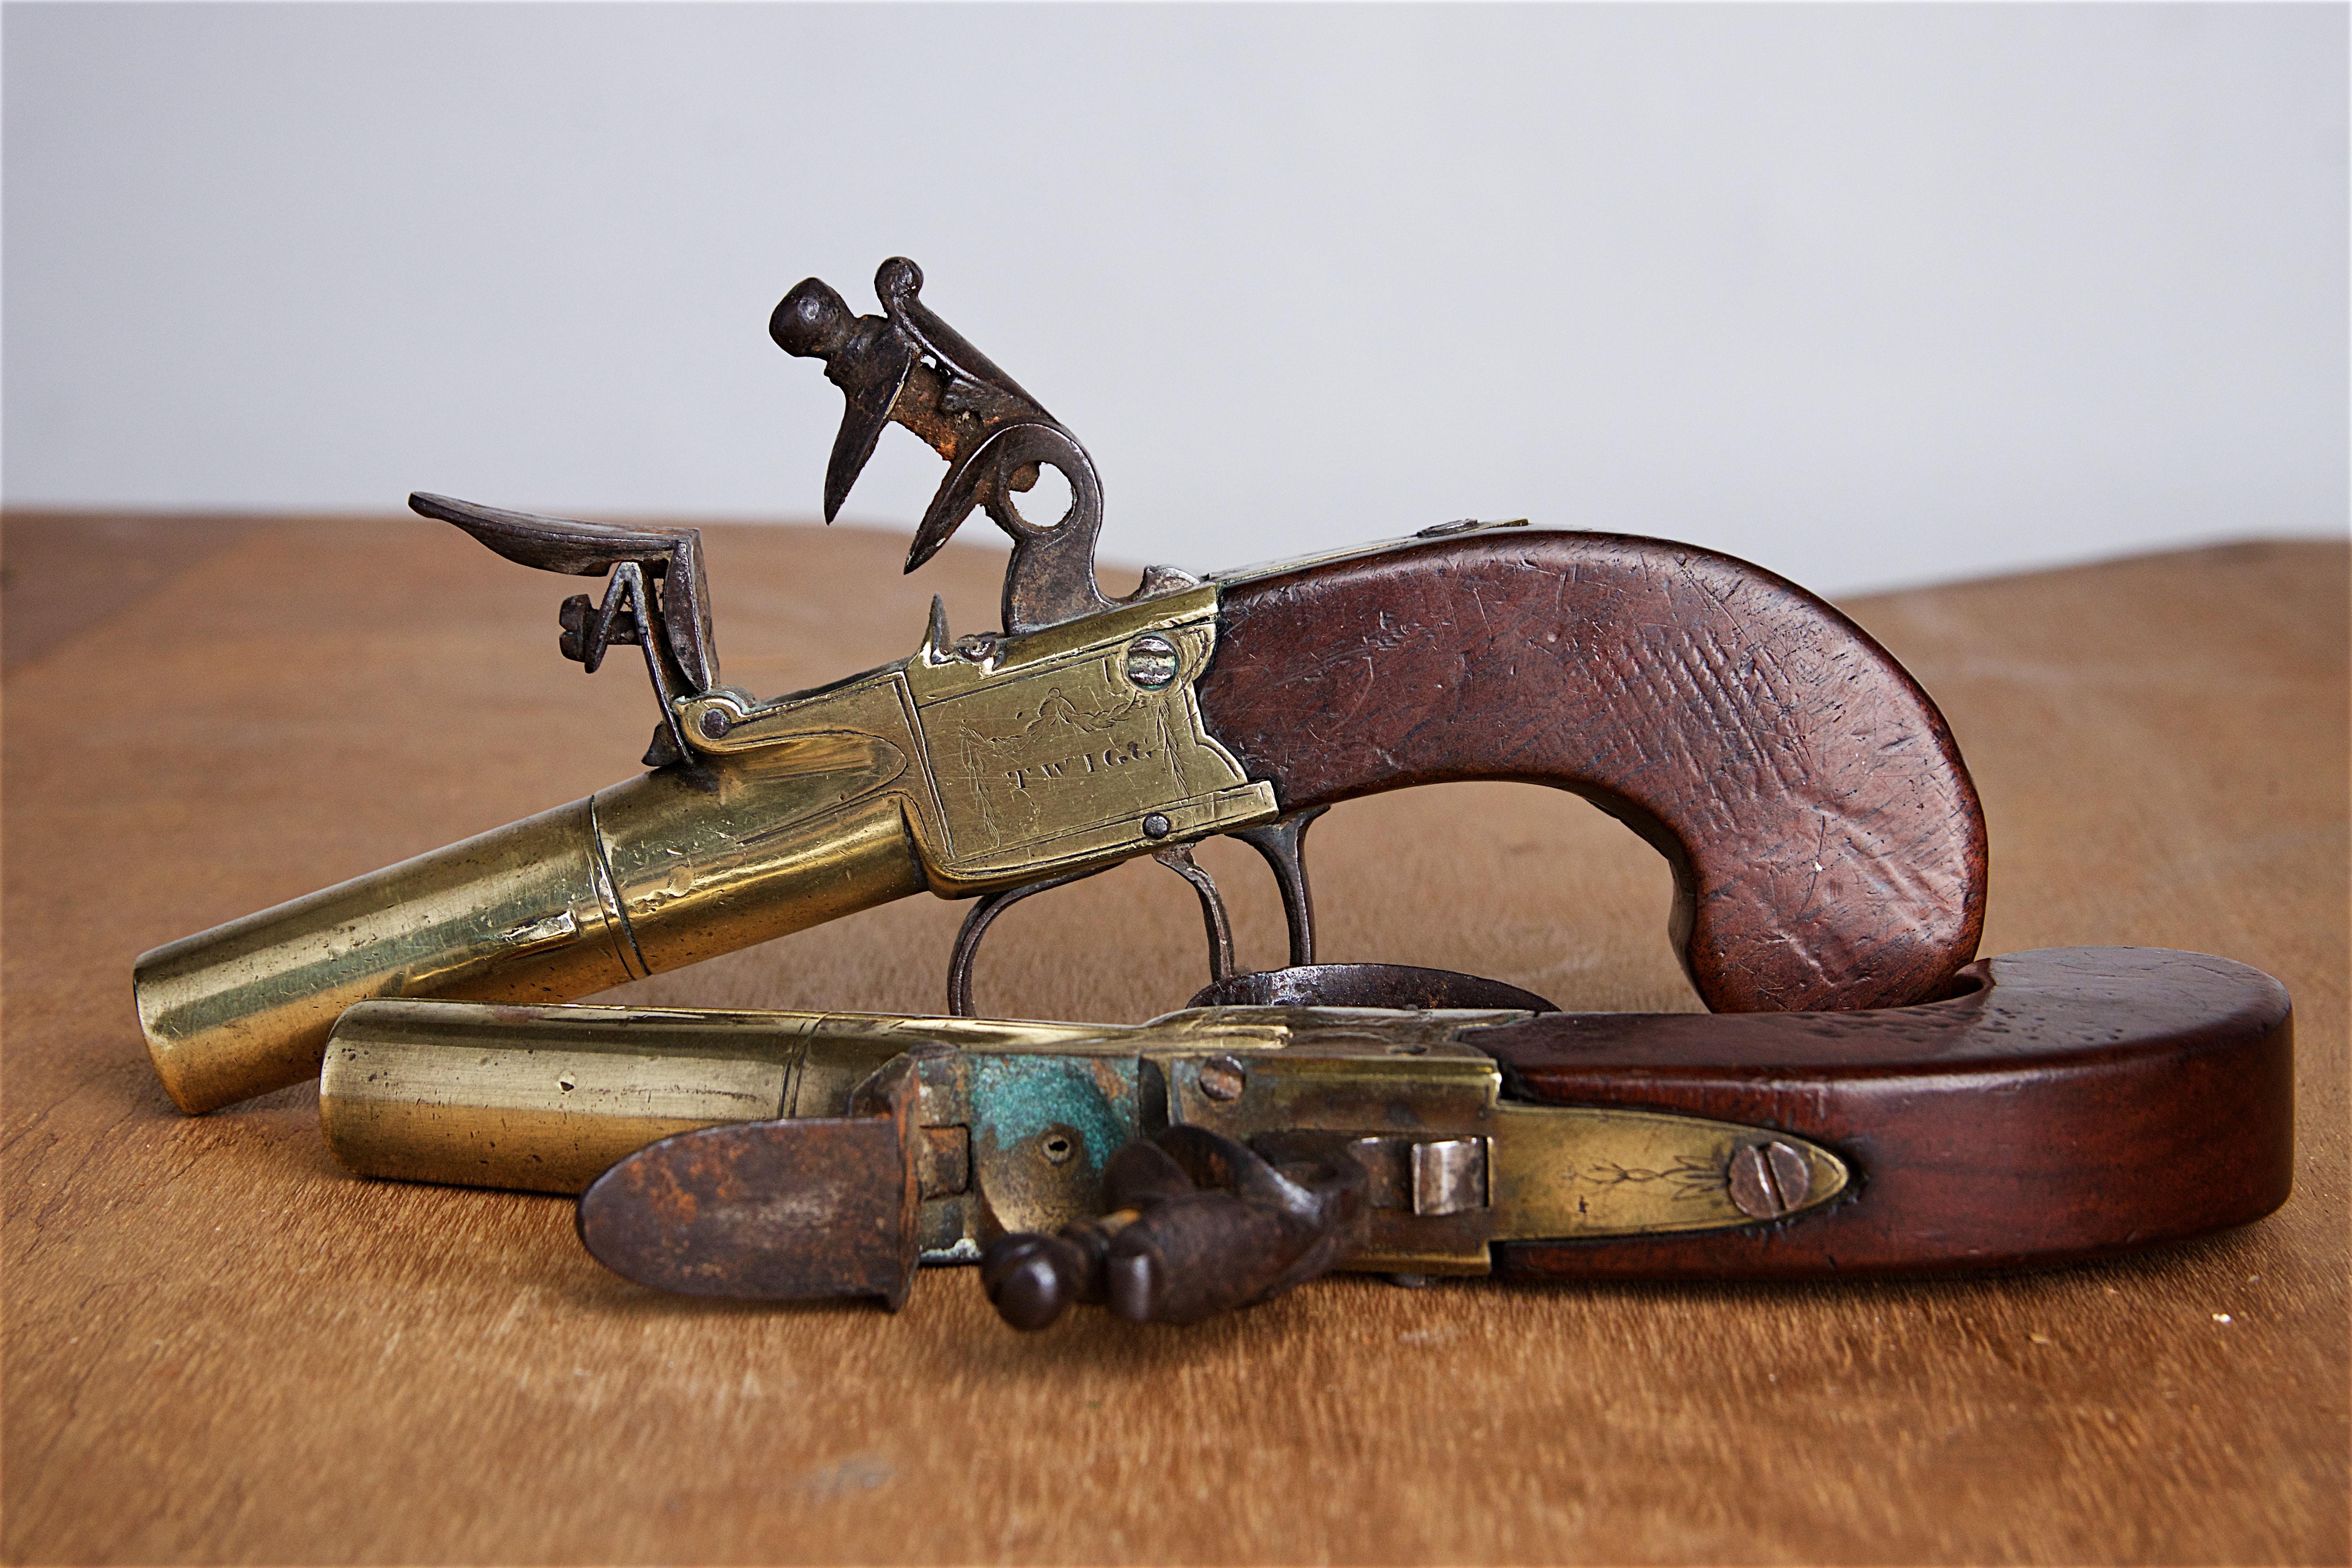 Pair of 18th century pistols by renowned London gunmaker, John Twigg.
Twigg was a master of his craft and these pistols bear the marking “Twigg” on one side of the action and “London” on the other side.
Mahogany grip with screw off brass